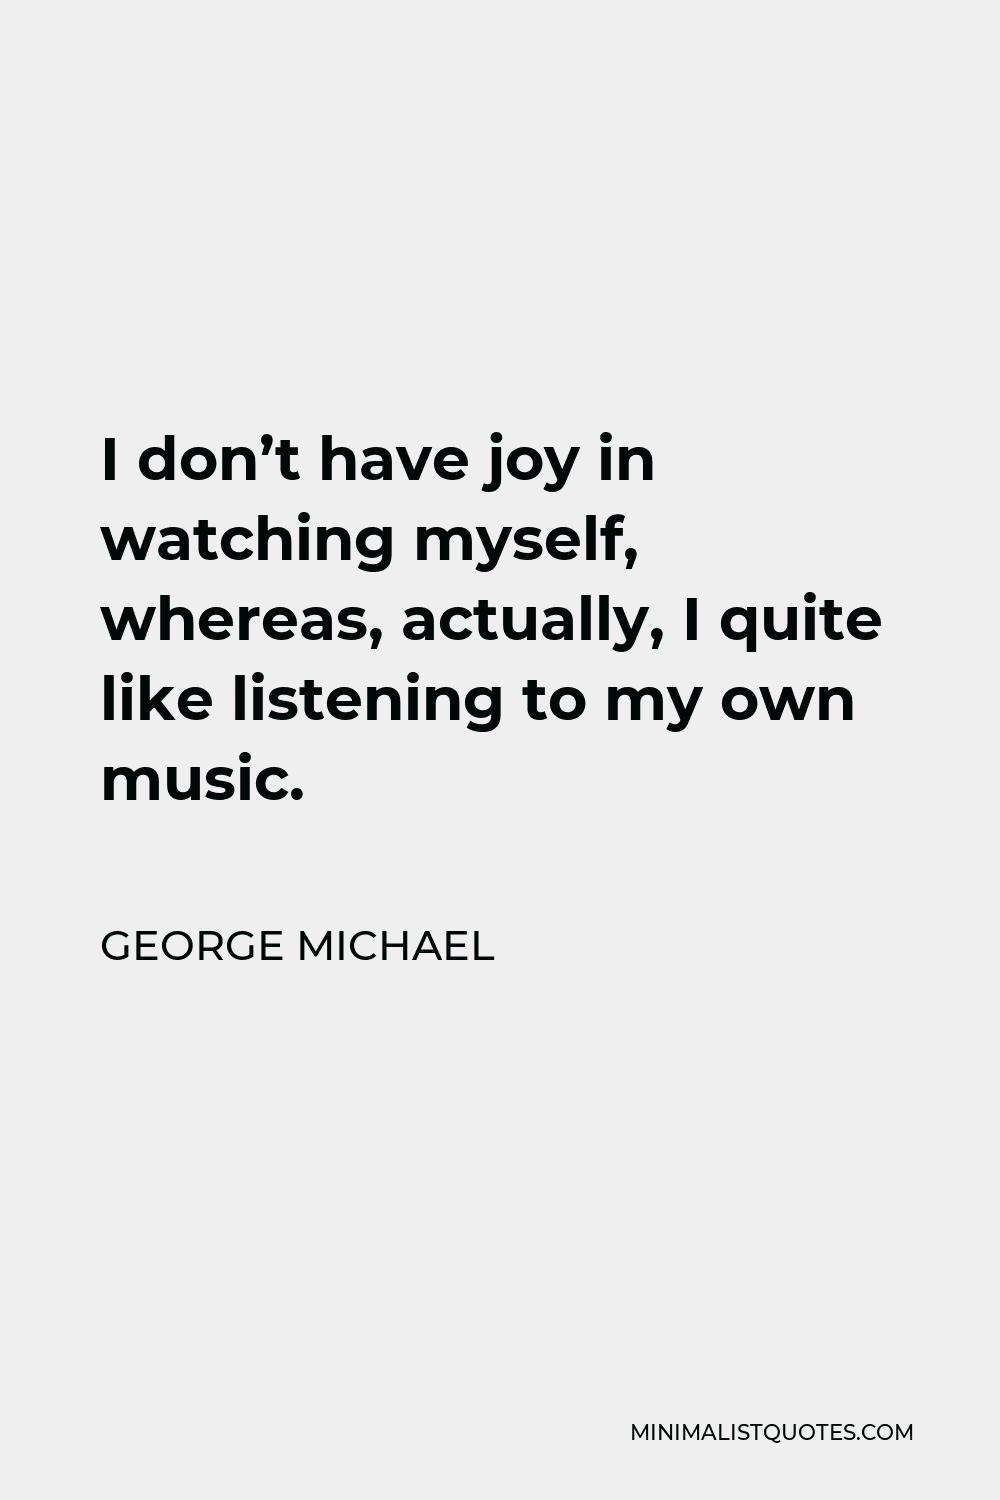 George Michael Quote - I don’t have joy in watching myself, whereas, actually, I quite like listening to my own music.